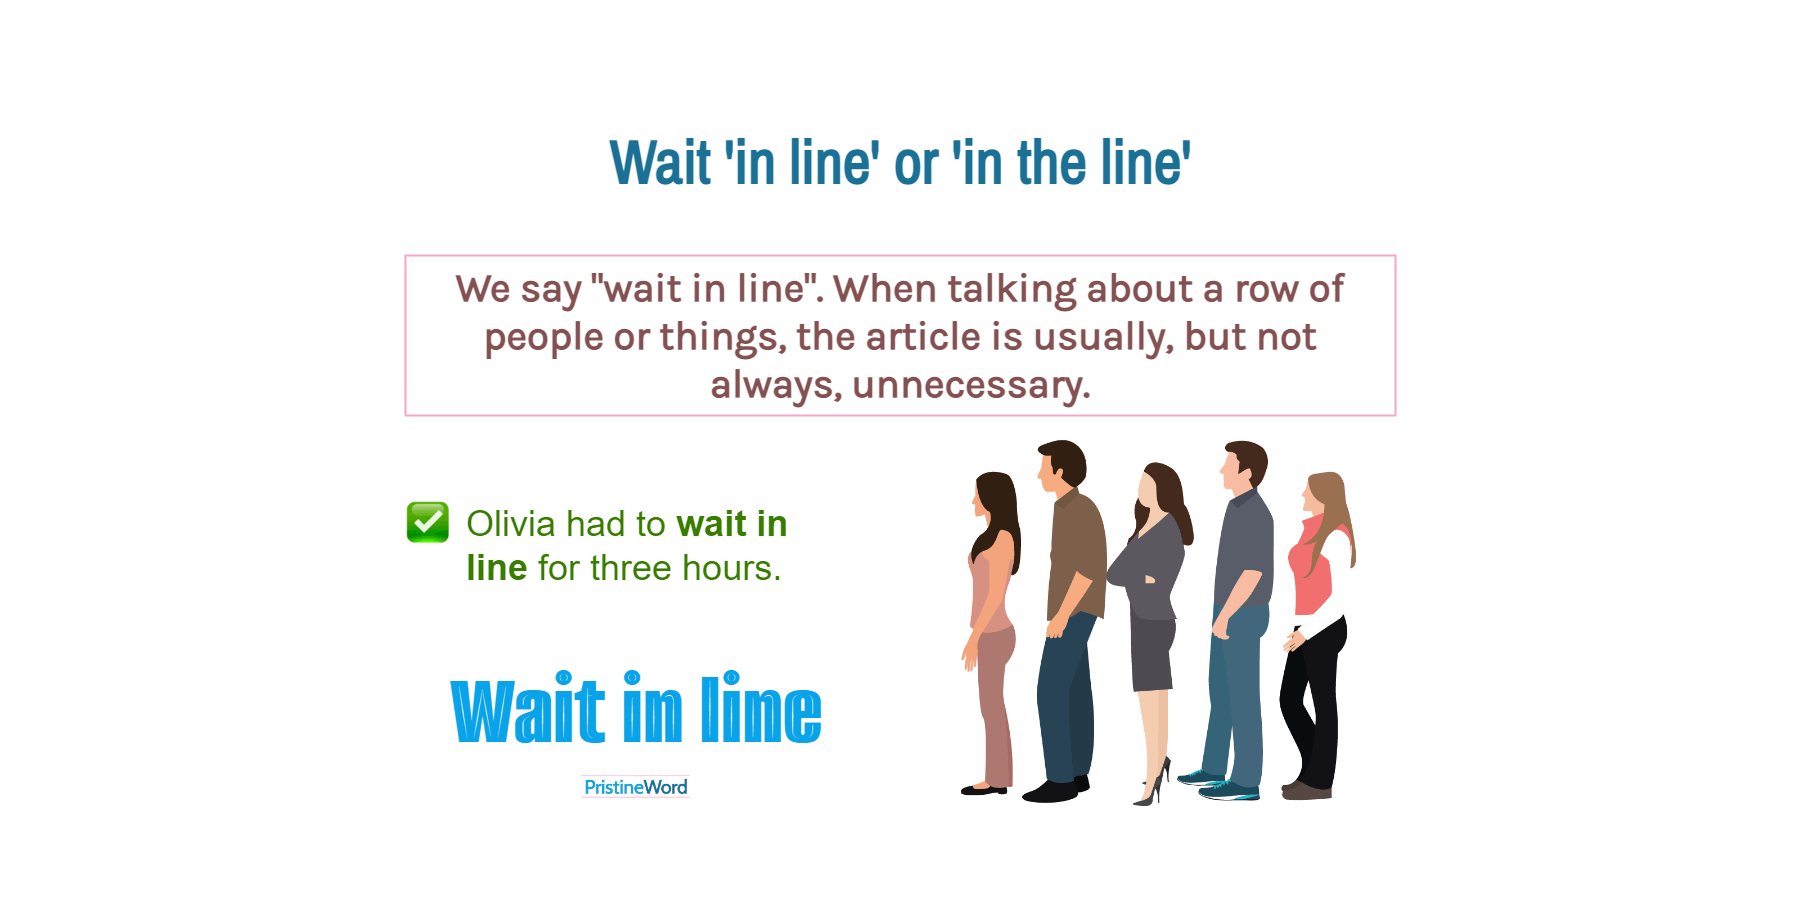 'Wait in Line' or 'Wait in the Line'